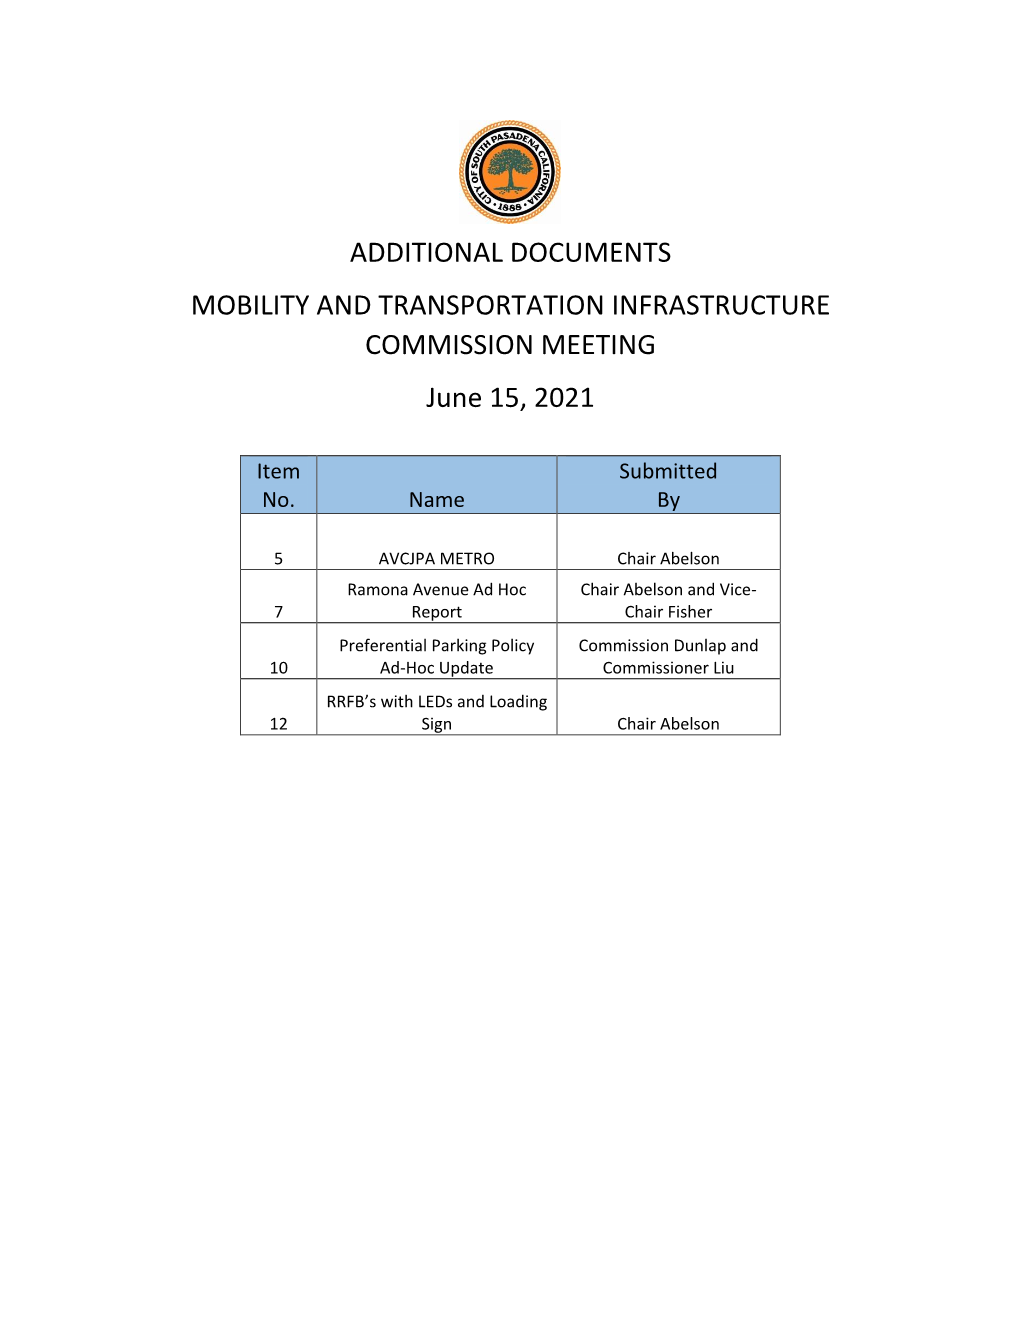 ADDITIONAL DOCUMENTS MOBILITY and TRANSPORTATION INFRASTRUCTURE COMMISSION MEETING June 15, 2021